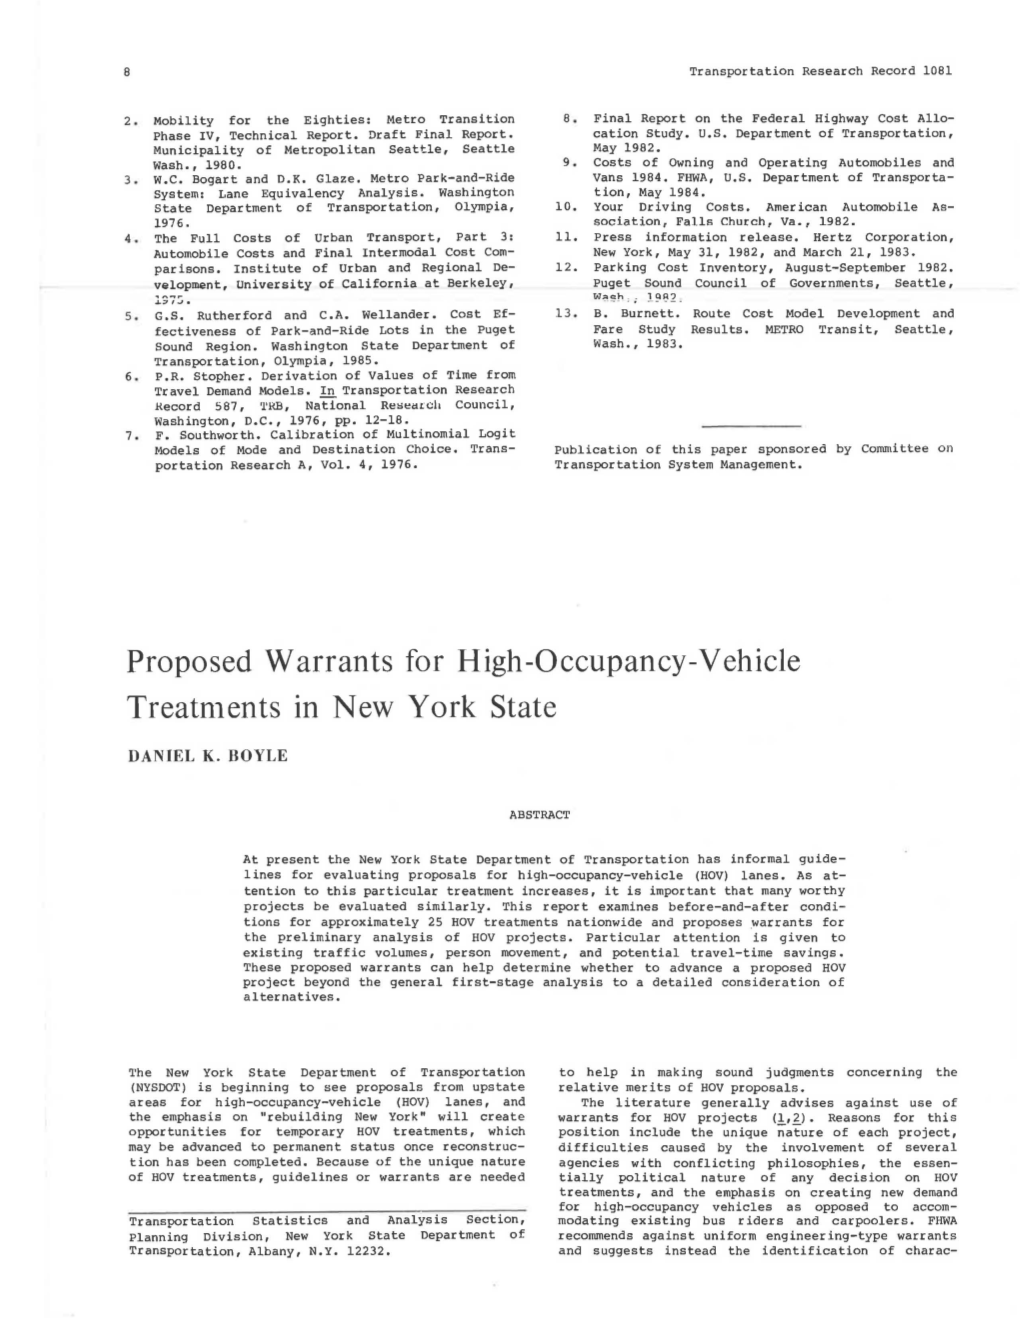 Proposed Warrants for High-Occupancy-Vehicle Treatn1ents in New York State